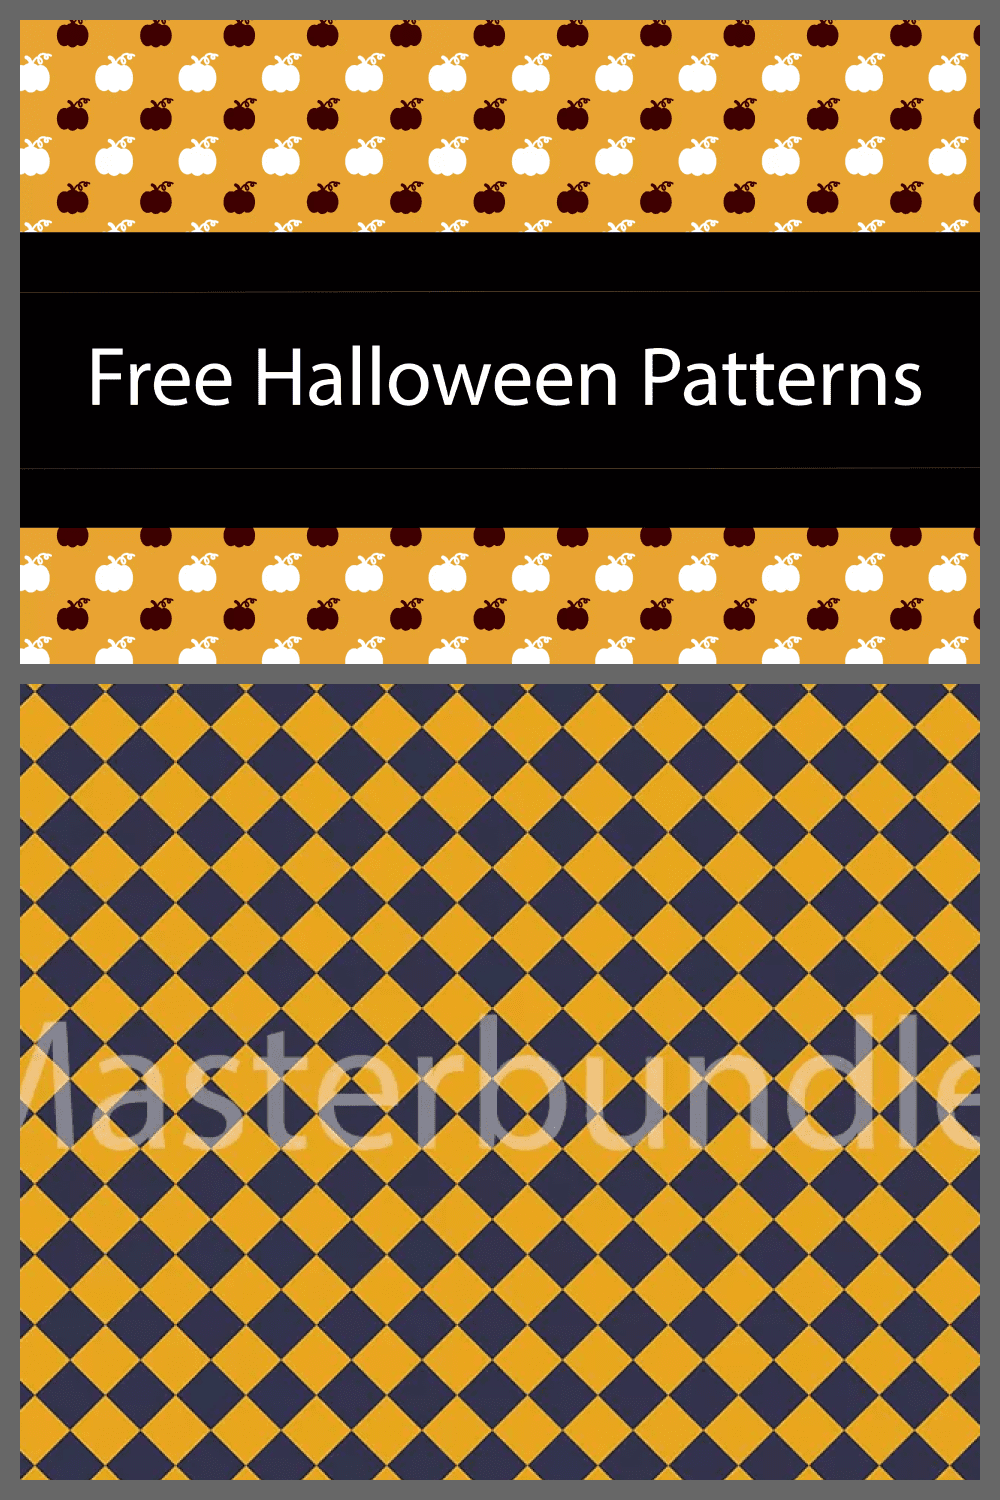 Black and orange patterns for wrapping paper.